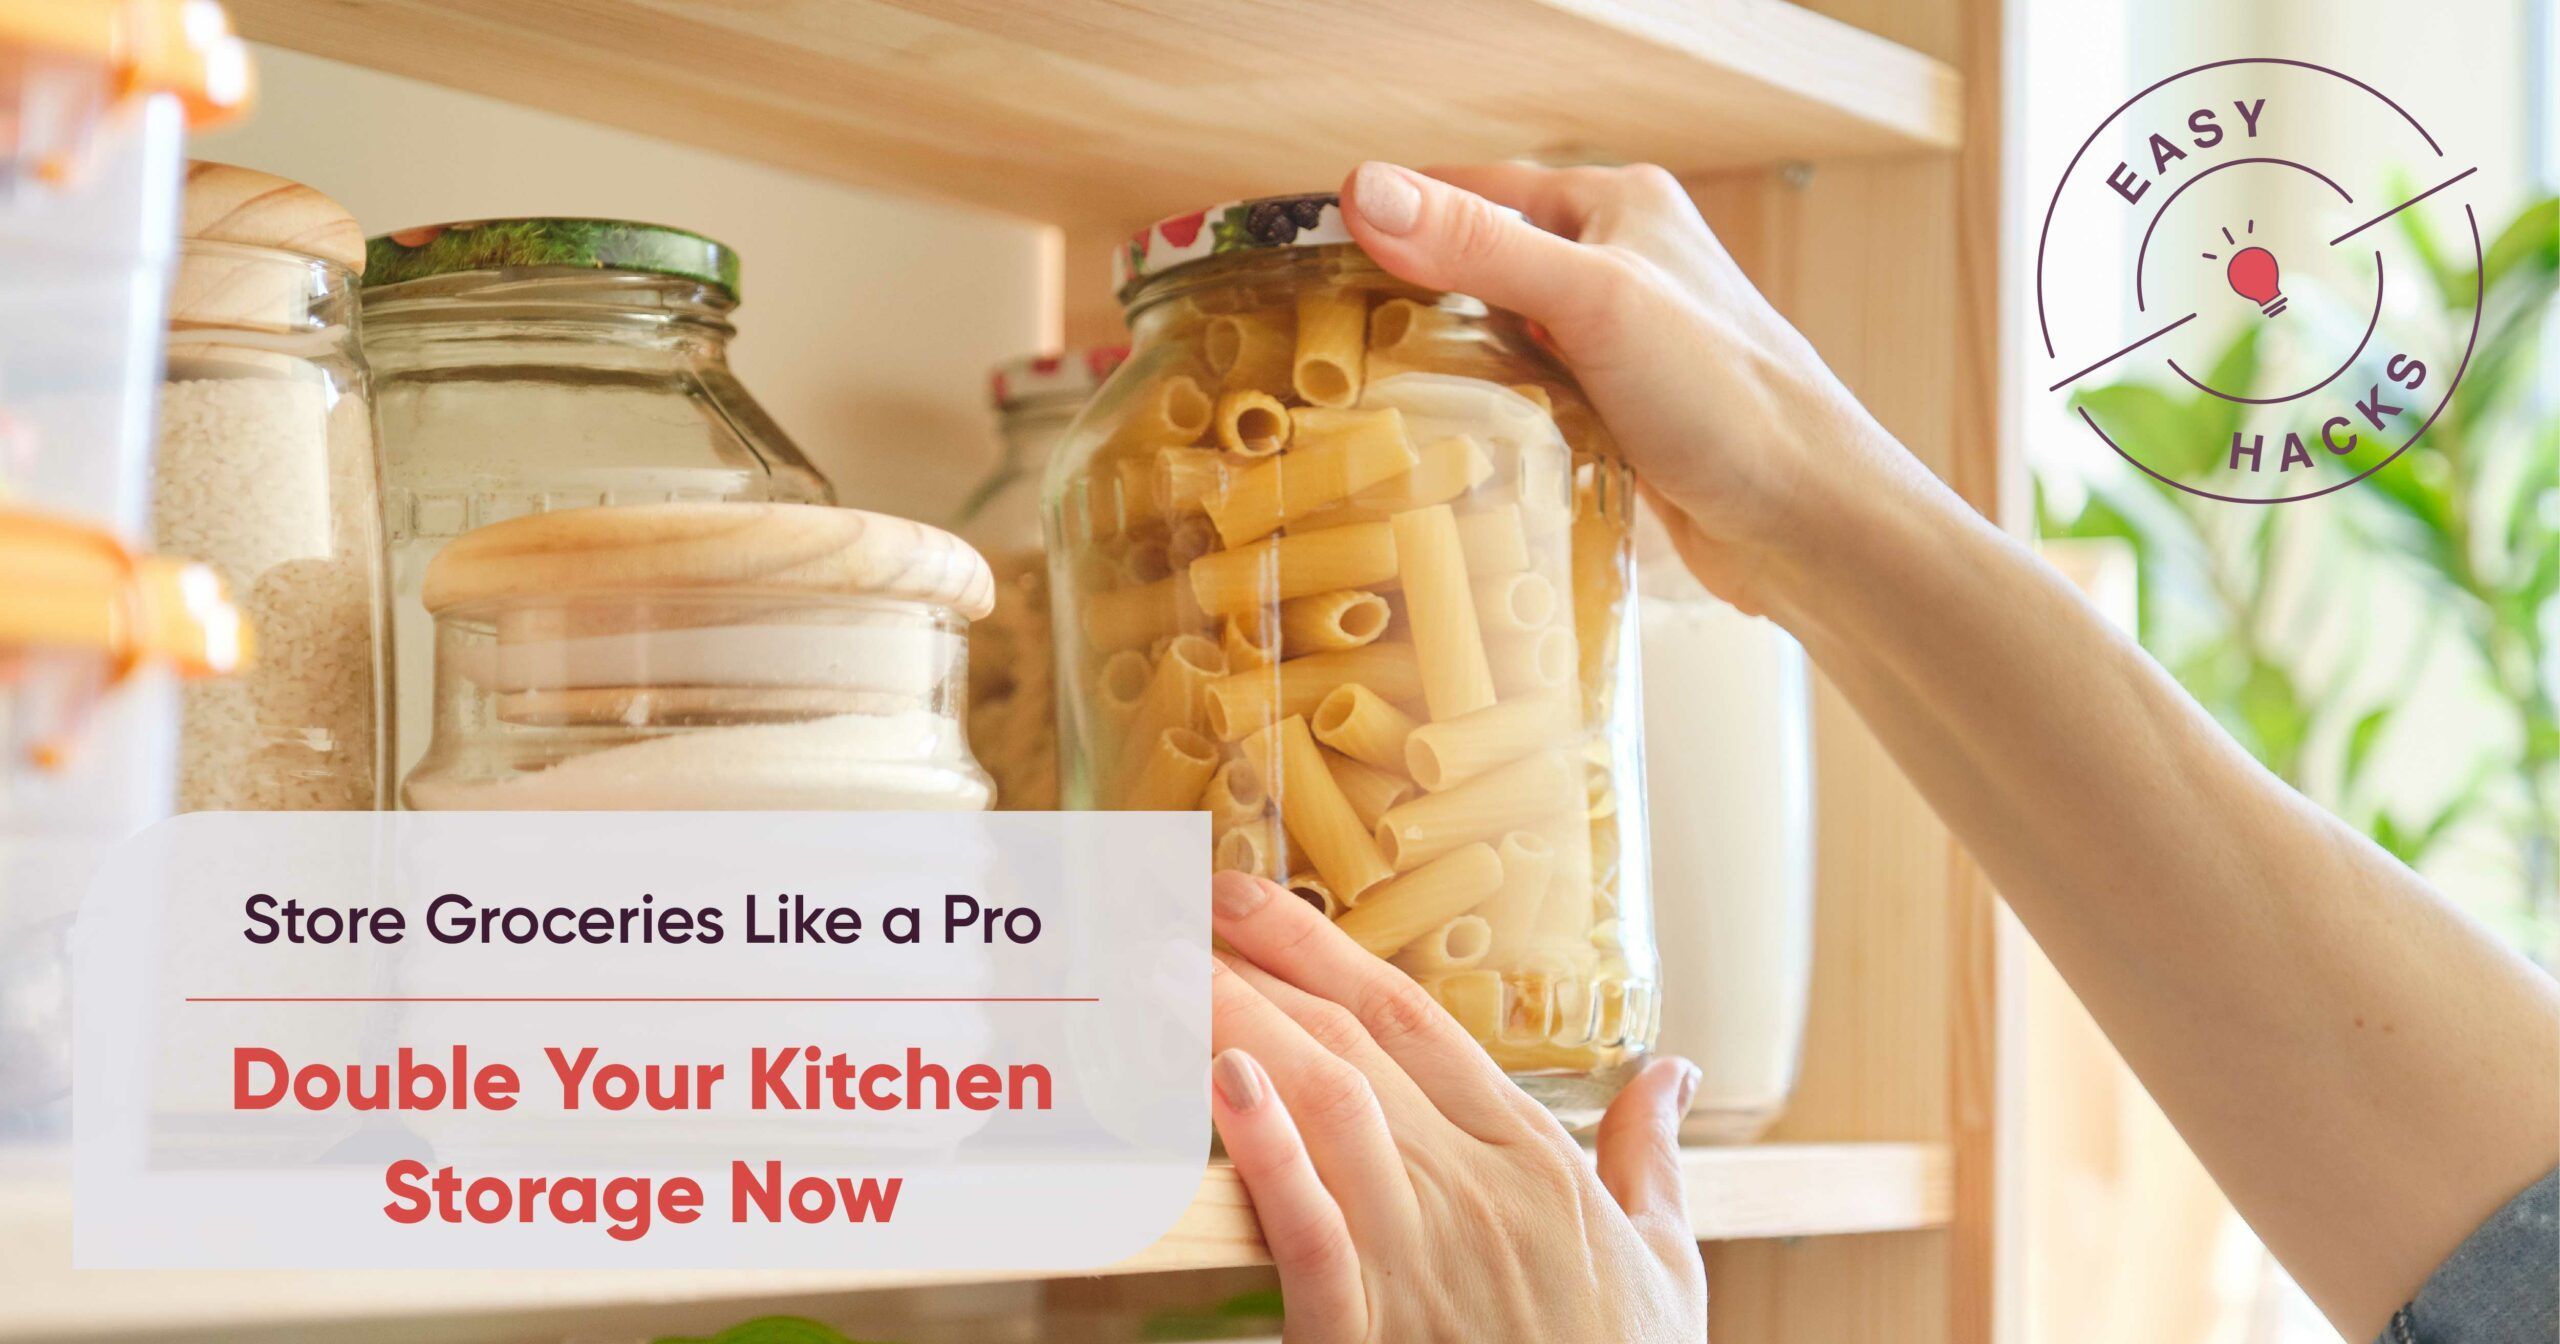 Buying Groceries in Bulk? Increase Kitchen Storage Space with These Expert Tips